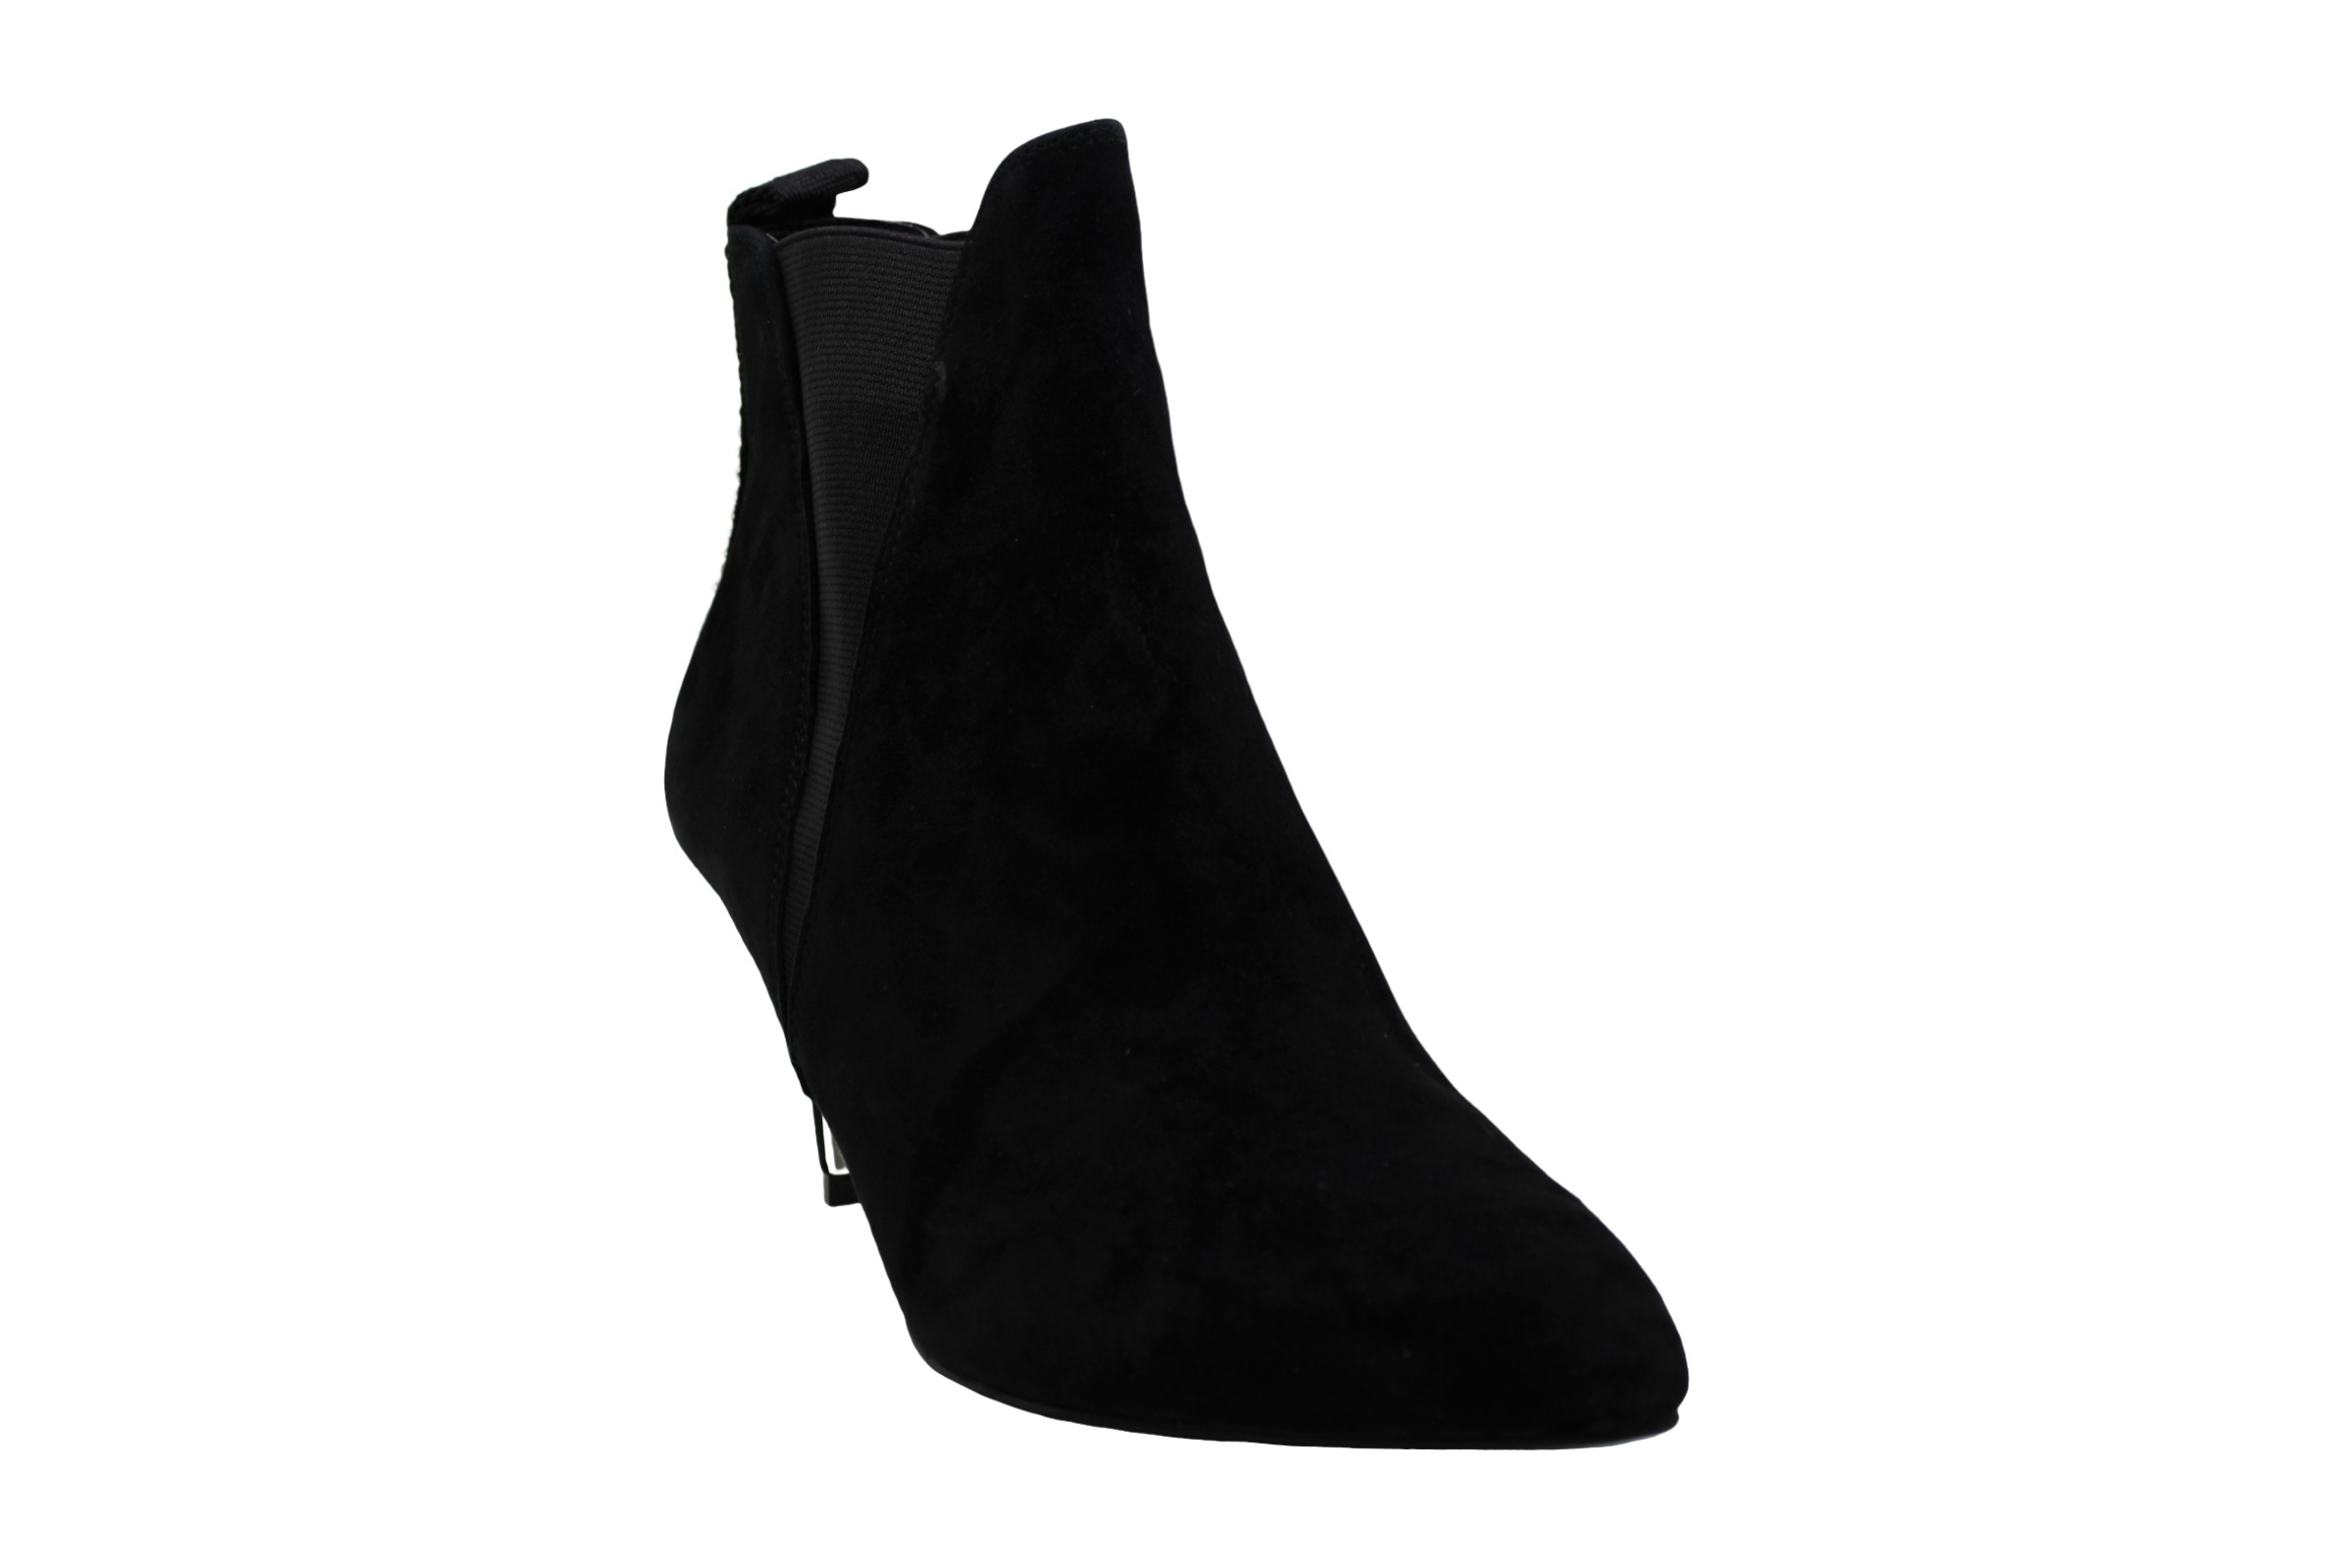 DKNY Womens Alani Suede Closed Toe Ankle Fashion Boots, Black Suede ...